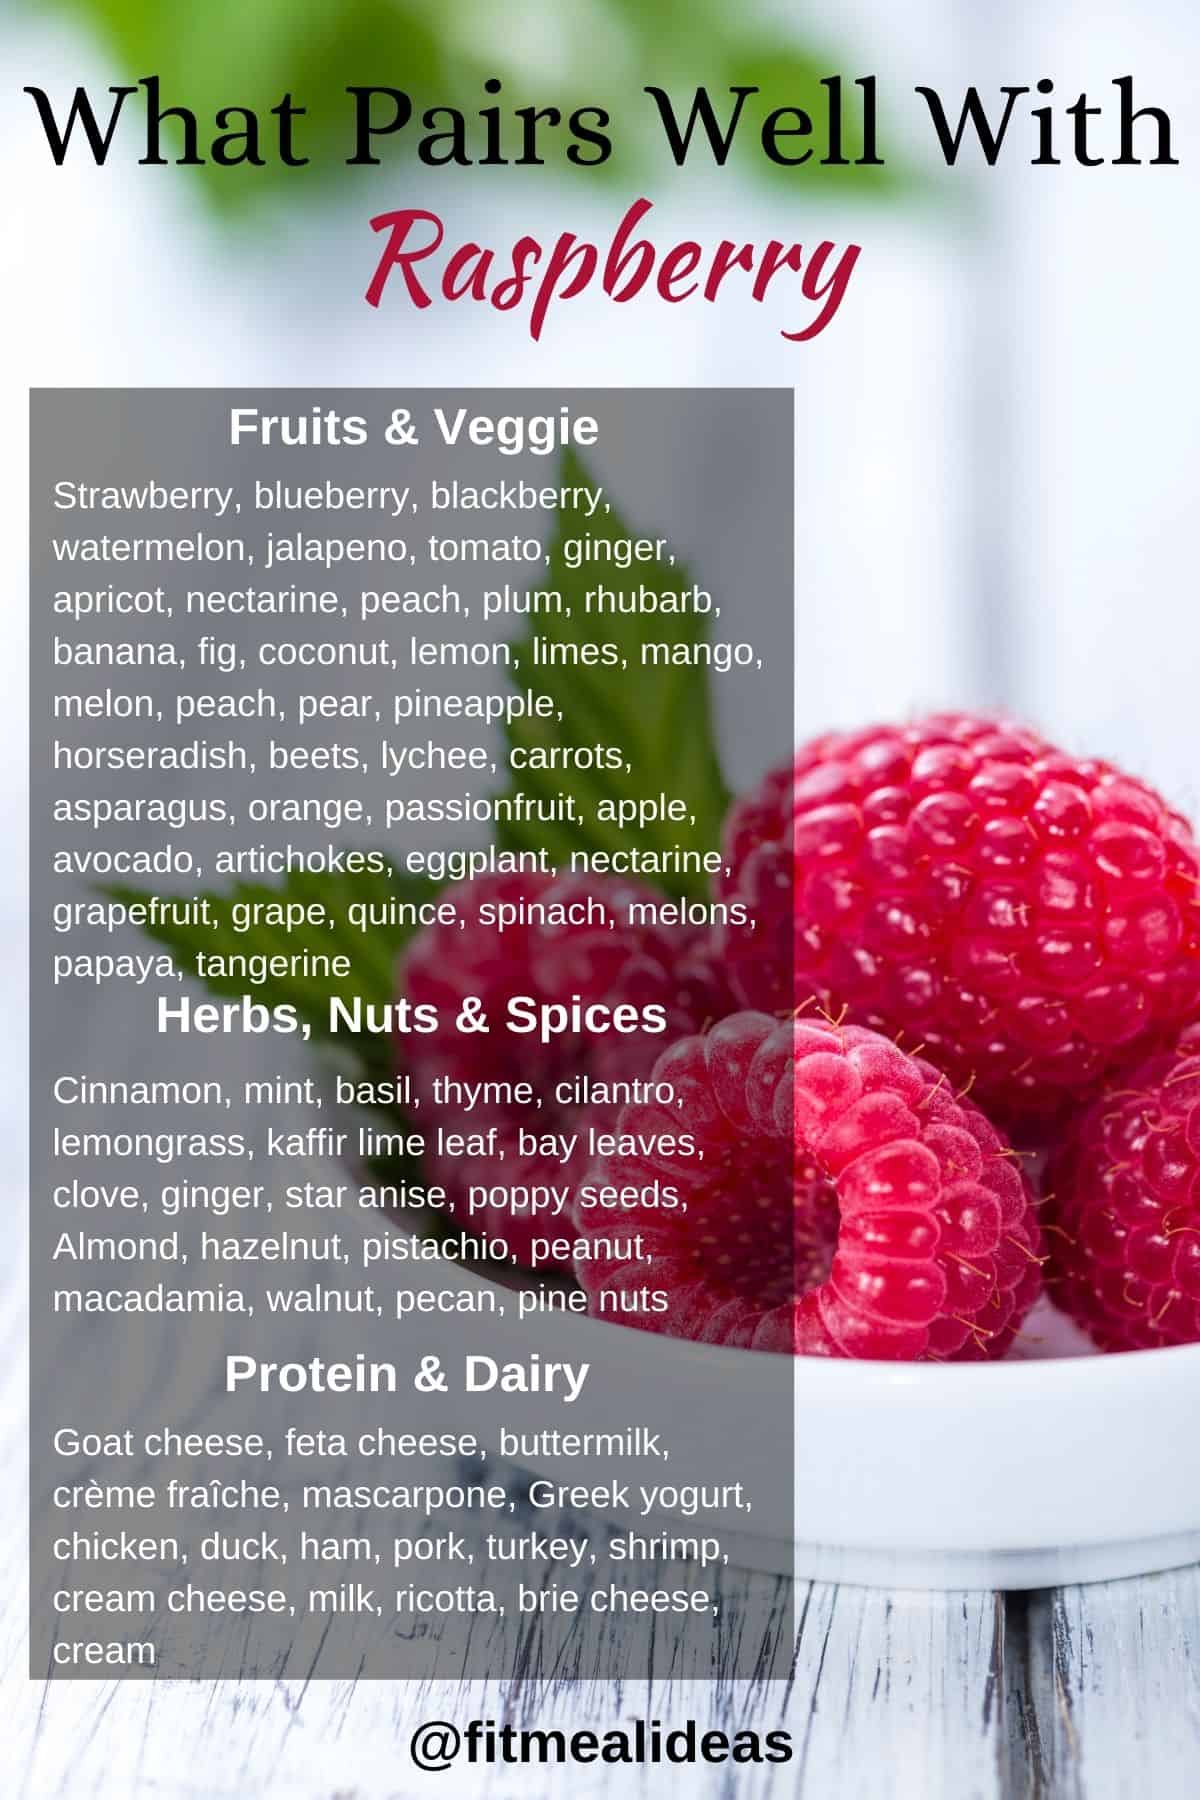 infographic showing what food groups pair well with raspberry.